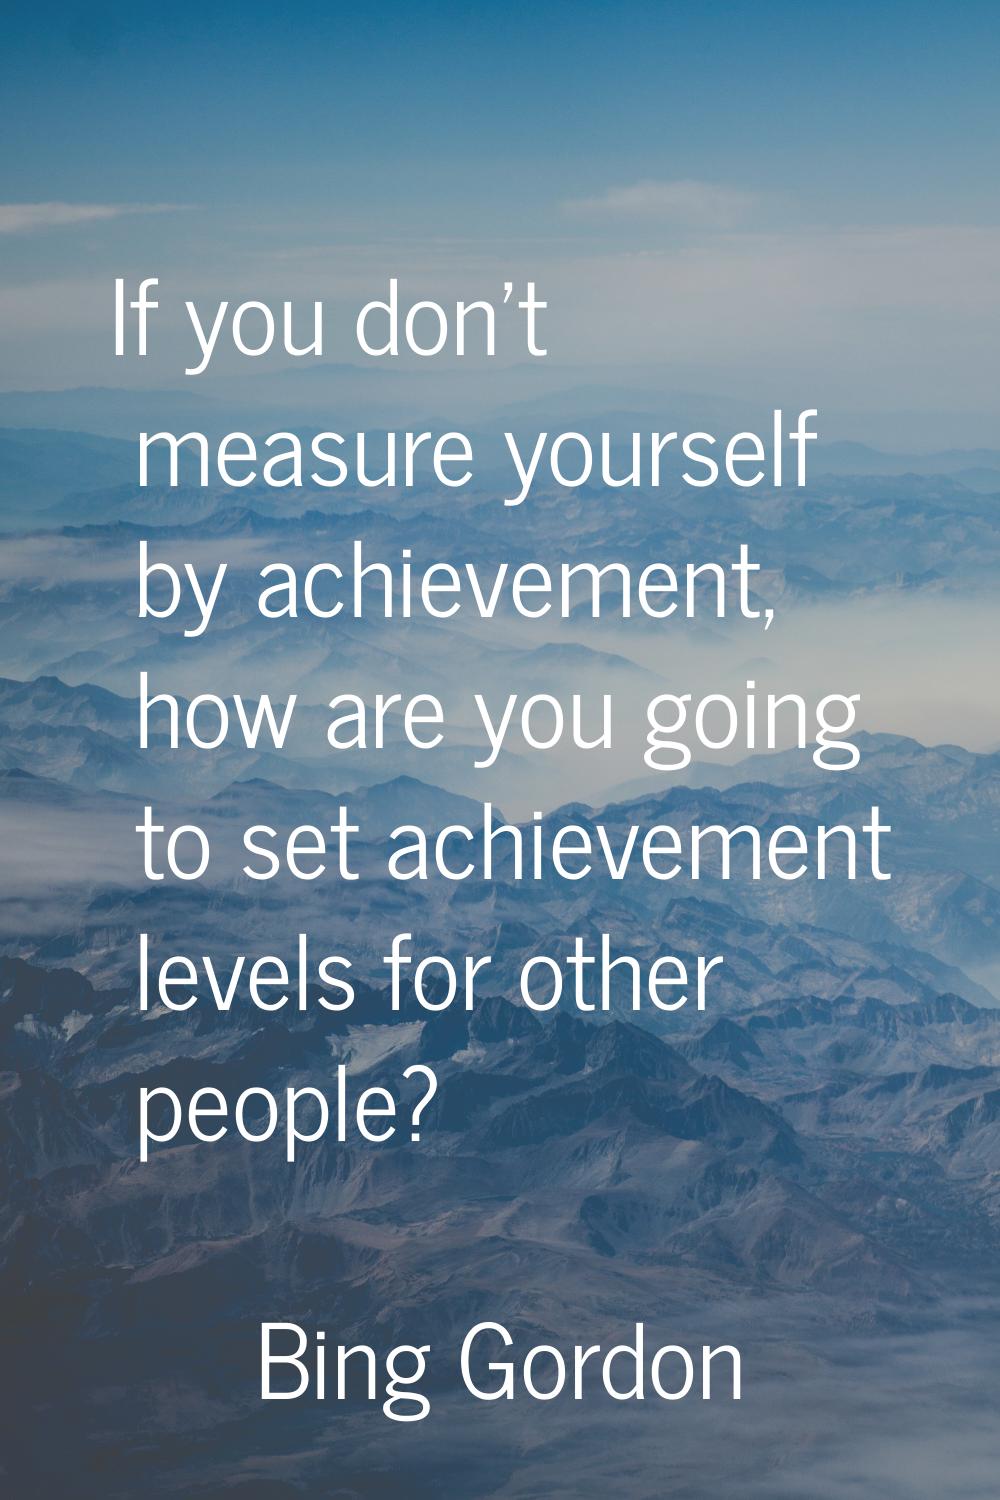 If you don't measure yourself by achievement, how are you going to set achievement levels for other